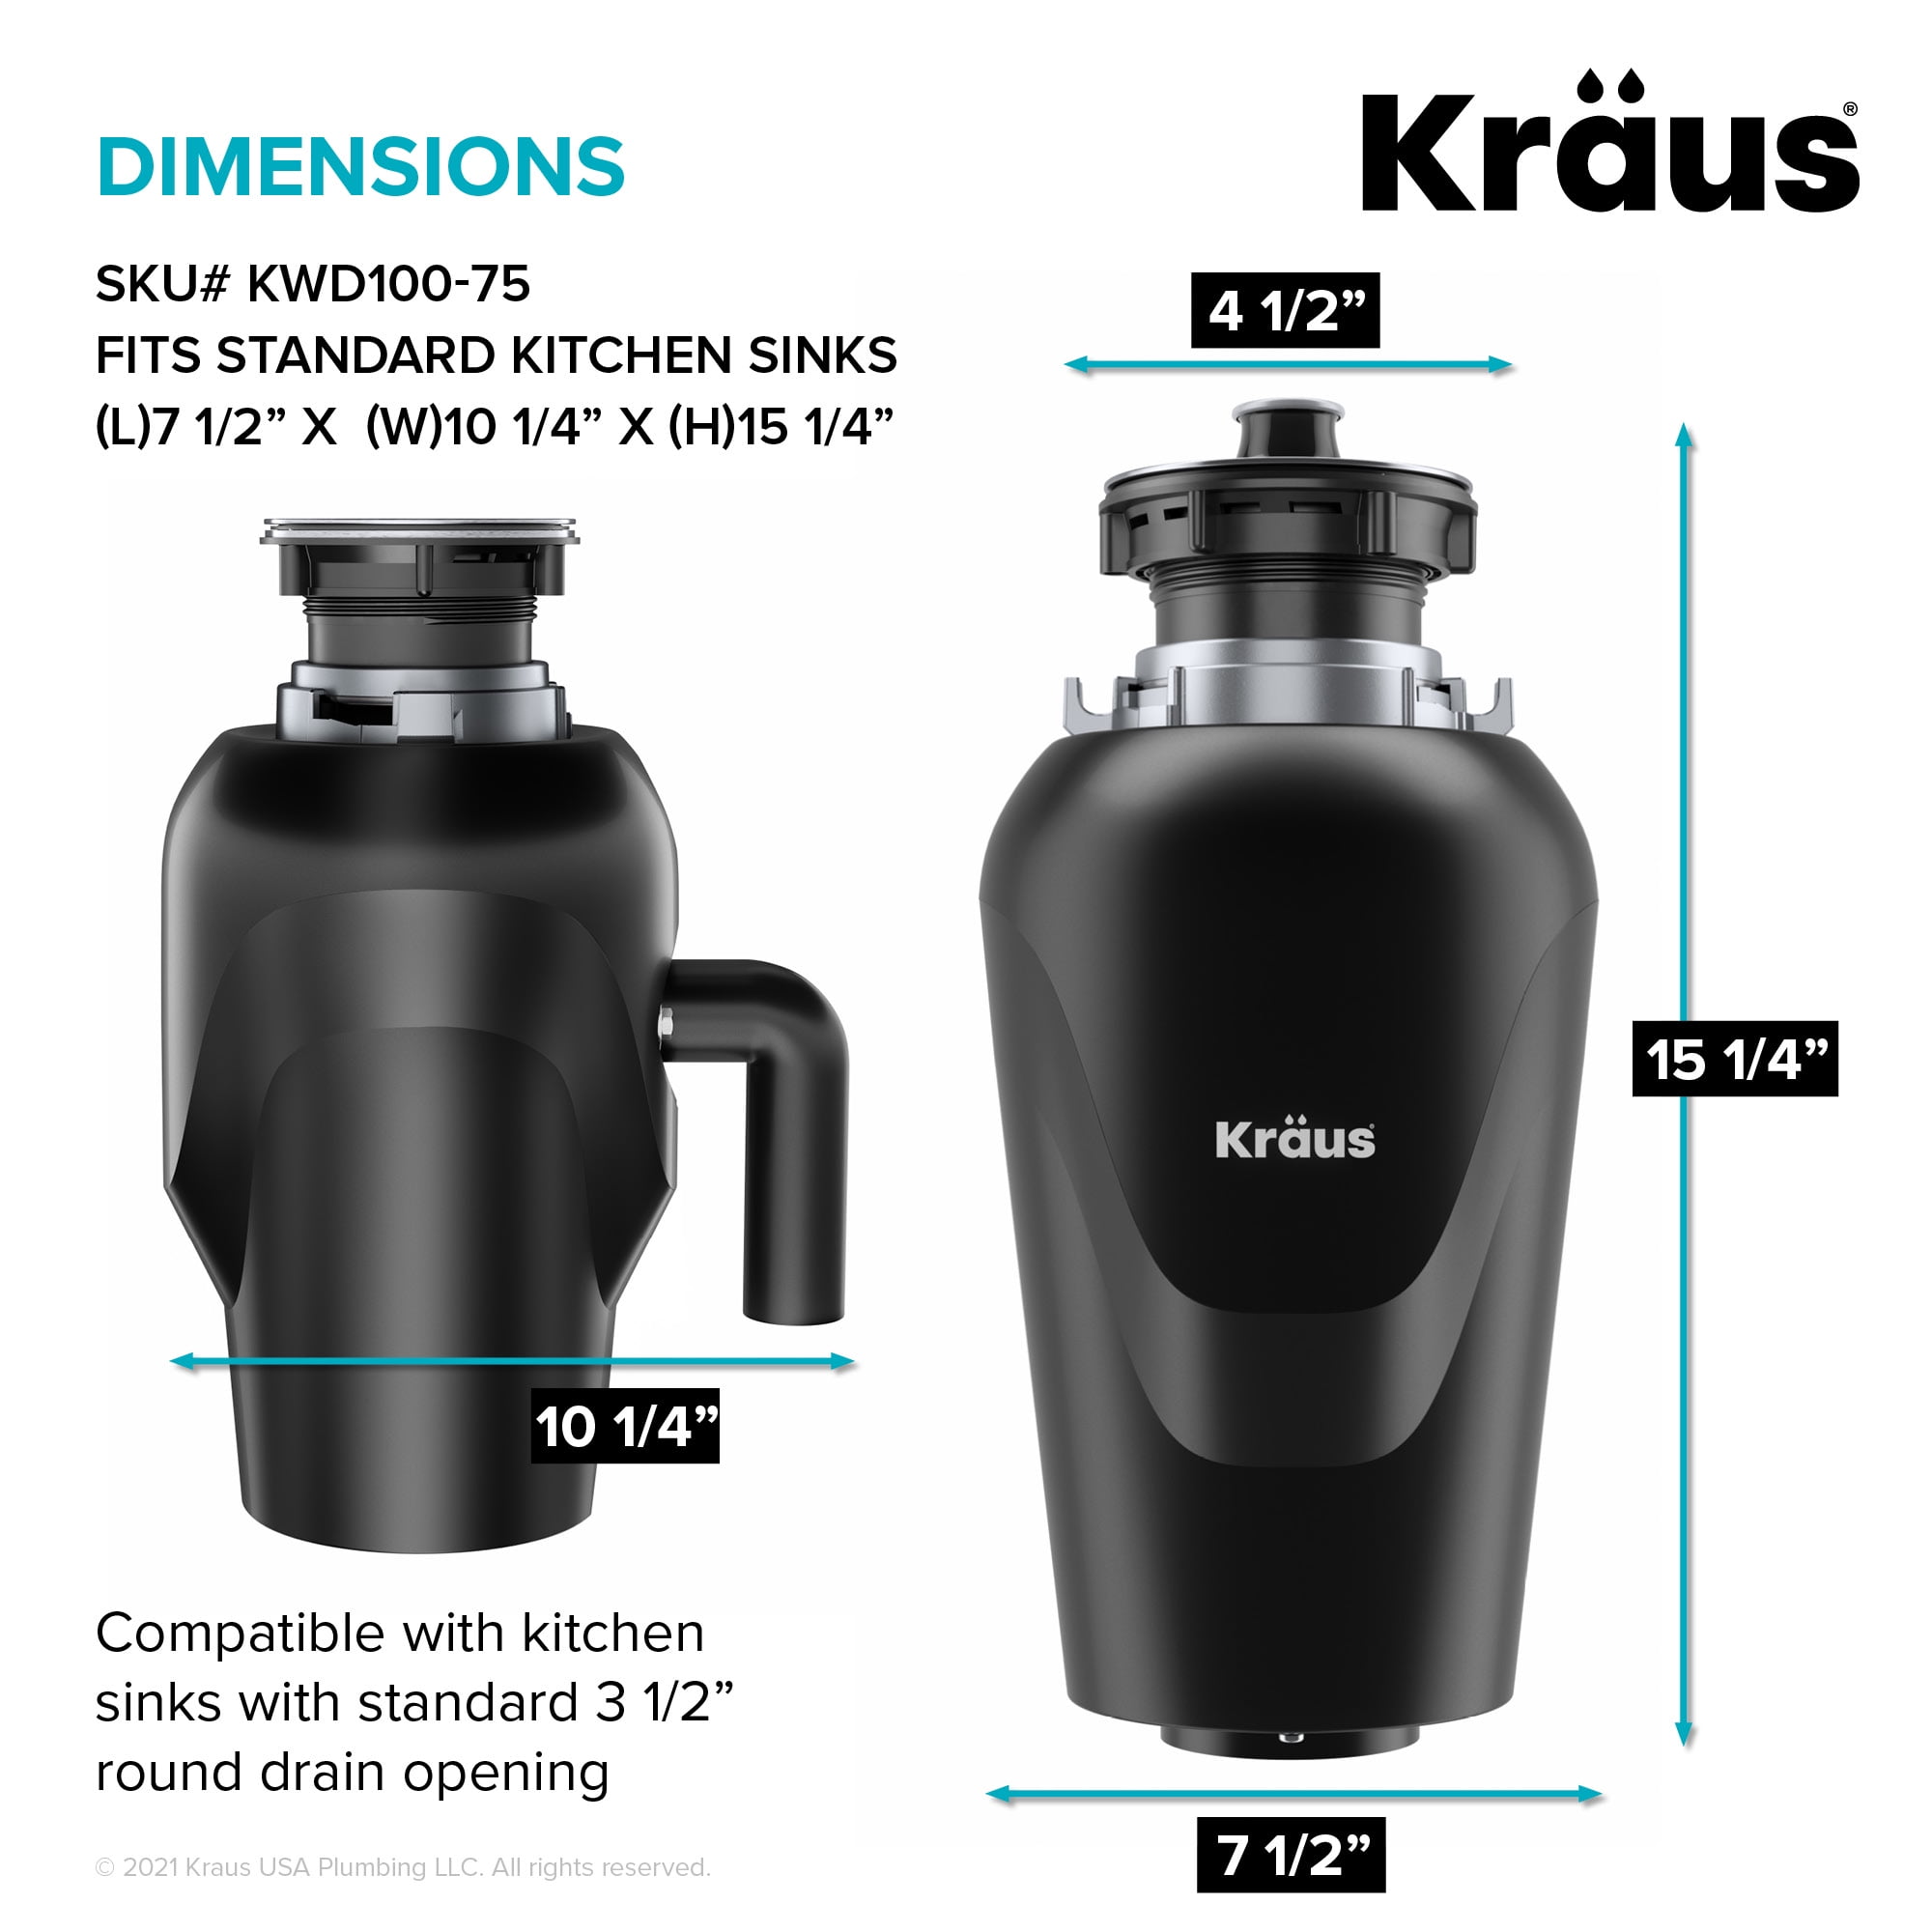 Kraus KWD100-33MBL WasteGuard High-Speed 1/3 HP Continuous Feed Ultra-Quiet Motor Garbage Disposal